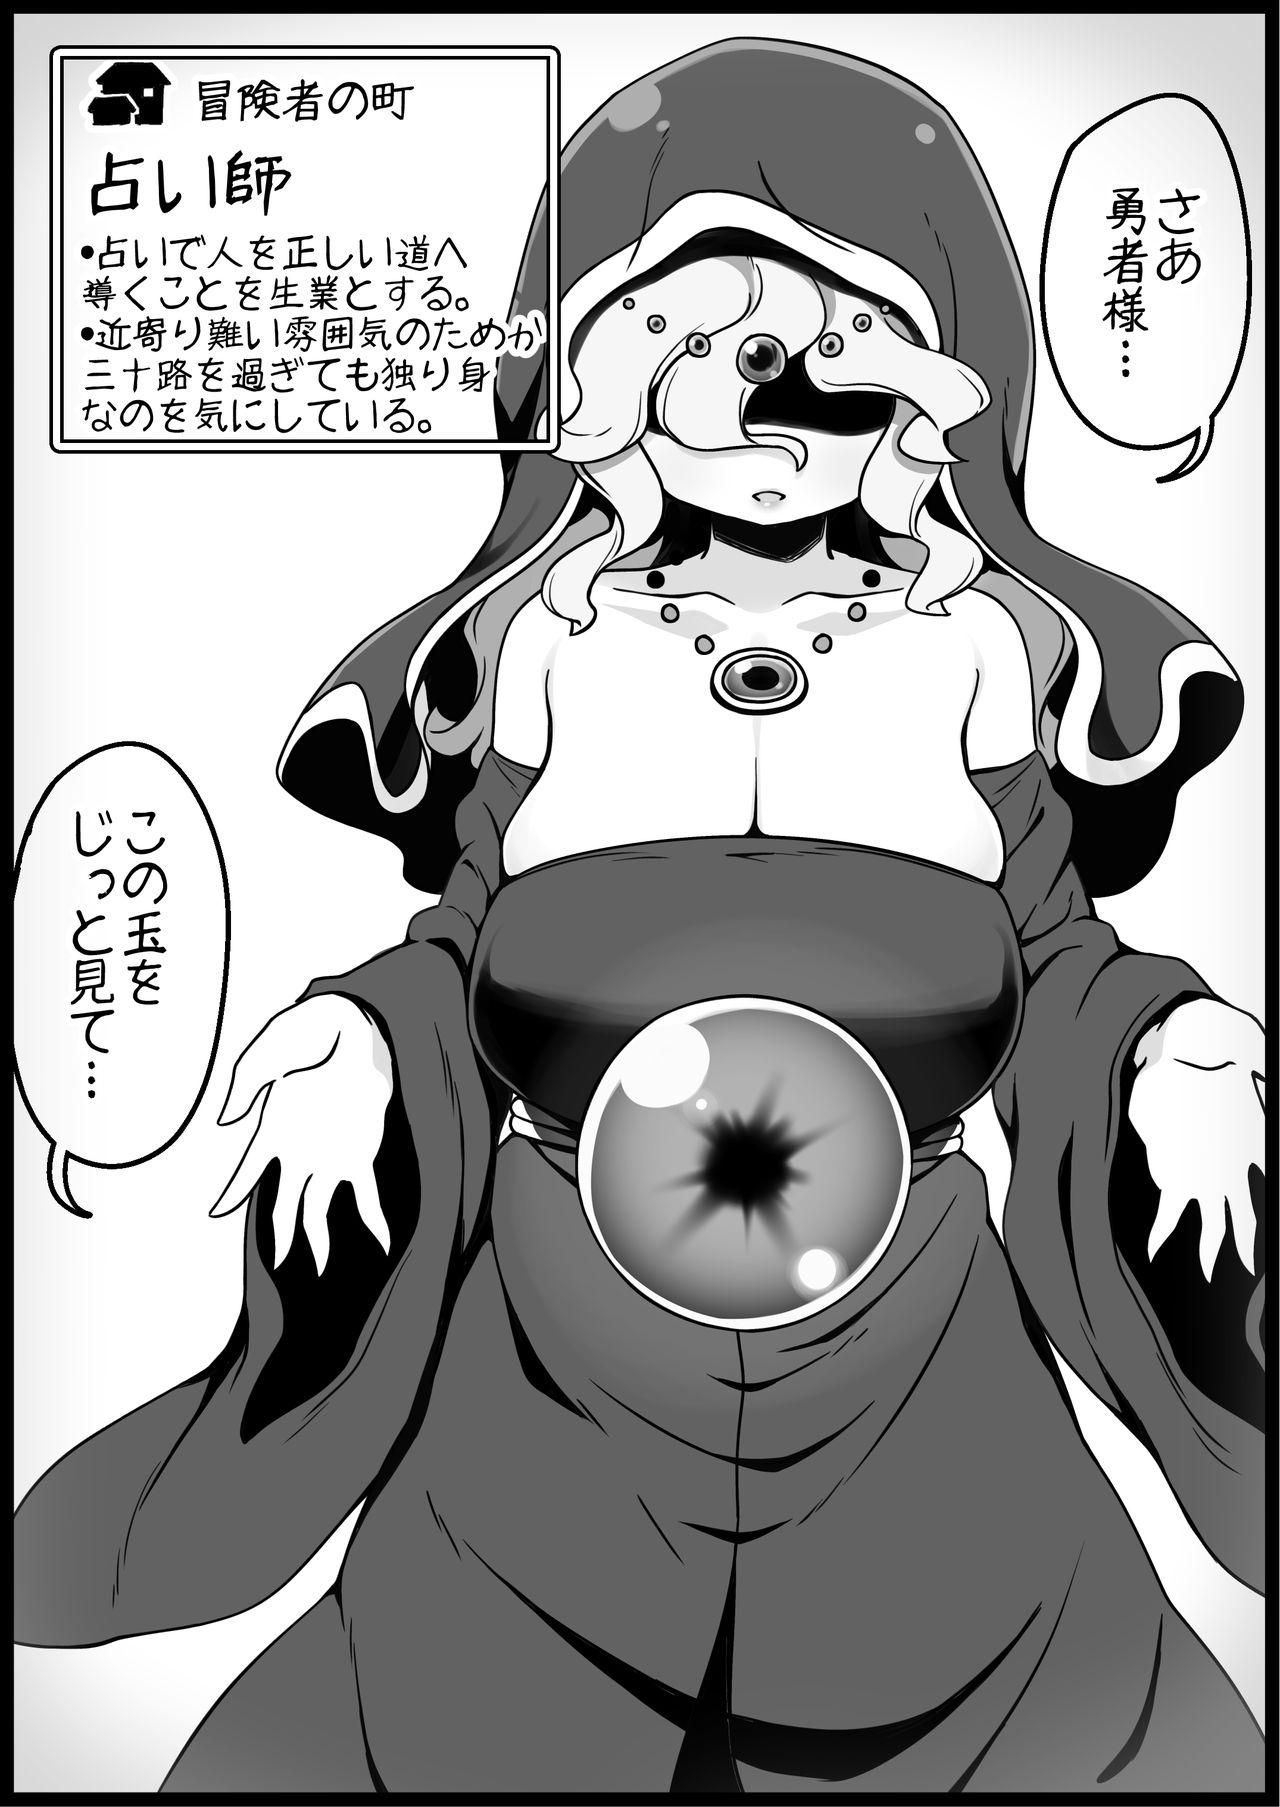 Penis [Succubus Egg] Fantasy World 2 Too Forgiving to Heroes-Continued NPC (mob) Opponent-Centered Short H Manga Collection- - Original Stockings - Page 6